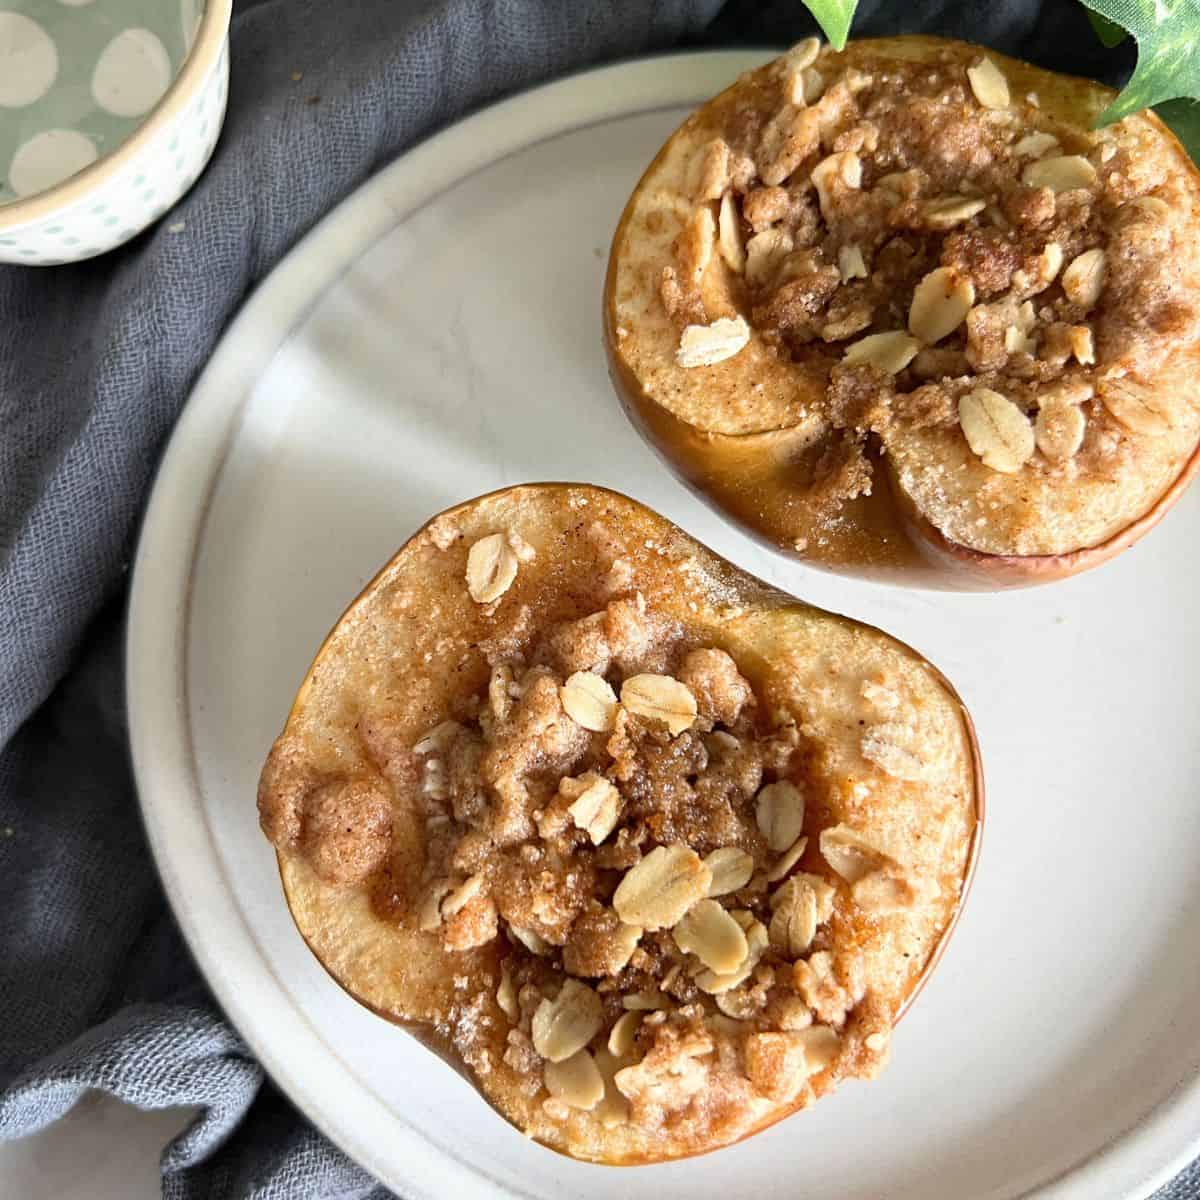 Baked Apples are a delicious and healthy dessert that can be enjoyed any time of the year.